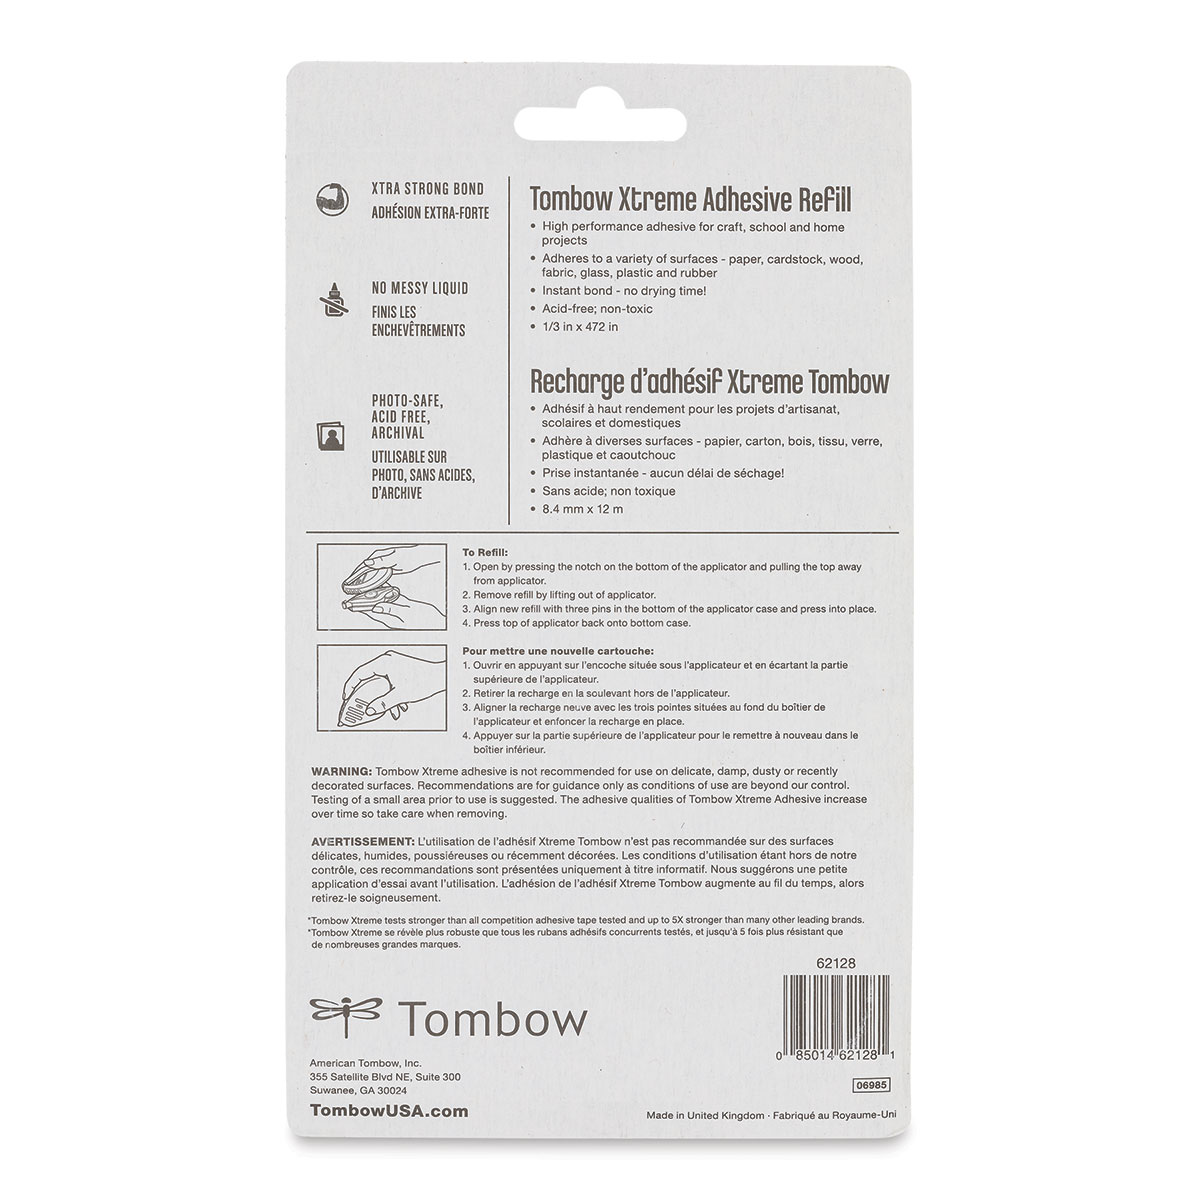 Tombow 62128 Xtreme Adhesive Refill, 1-Pack. High Performance Tape Runner  Refill That Works On a Variety of Hard to Glue Surfaces.